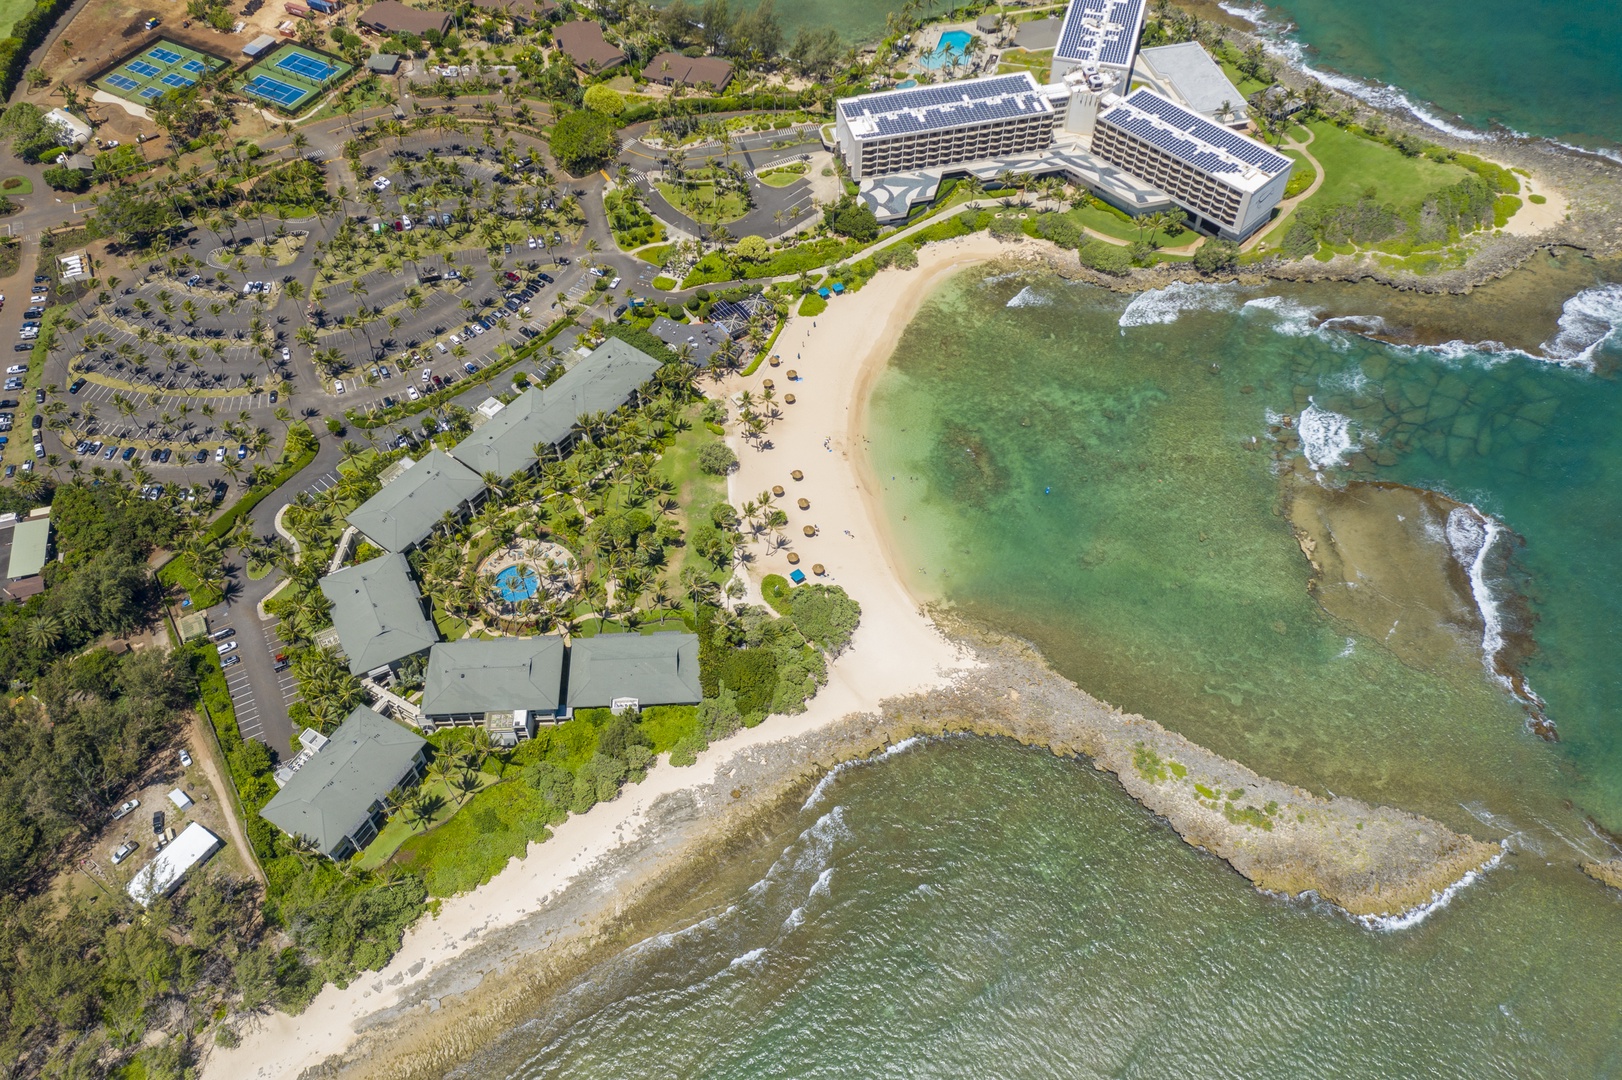 Kahuku Vacation Rentals, OFB Turtle Bay Villas 118 - Aerial view of the Villas, Turtle Bay Resort and Beaches